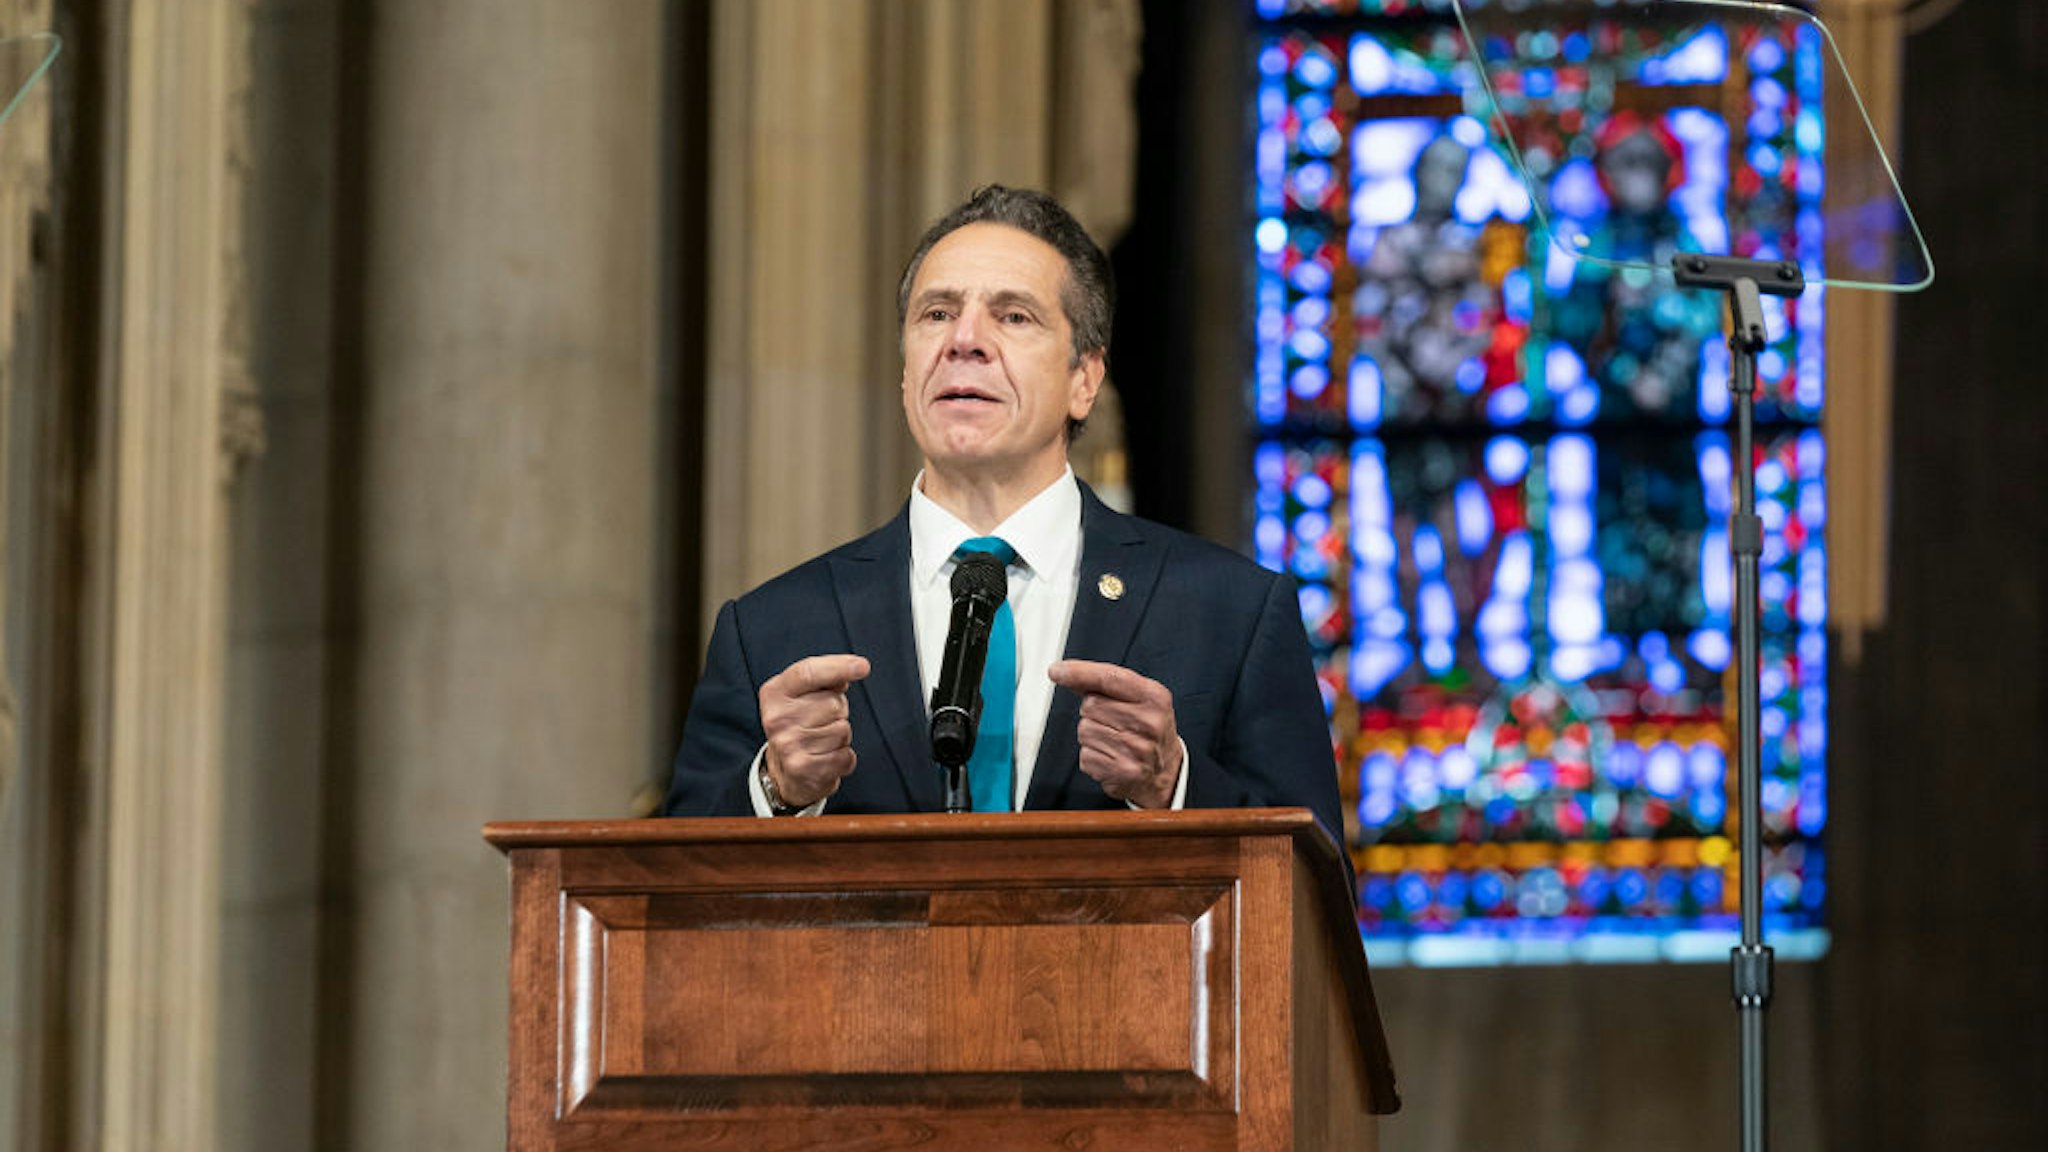 Governor Andrew Cuomo delivers remarks at Riverside Church